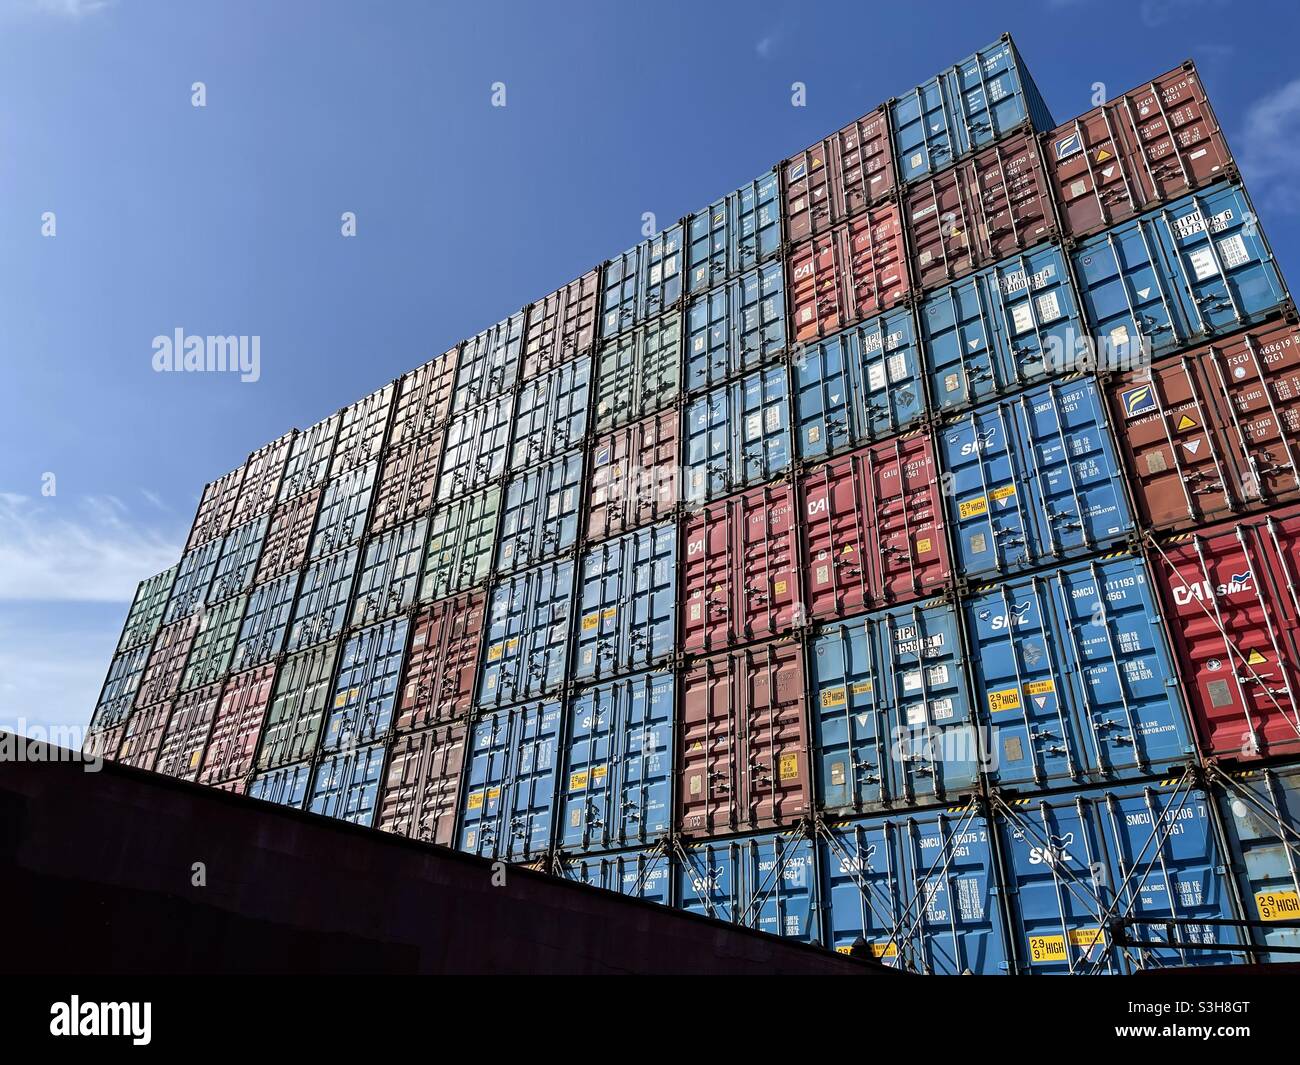 Stowed containers and secured containers with lashing bars and twist locks on the merchant container vessel during sunny summertime underway through ocean under blue sky. Stock Photo